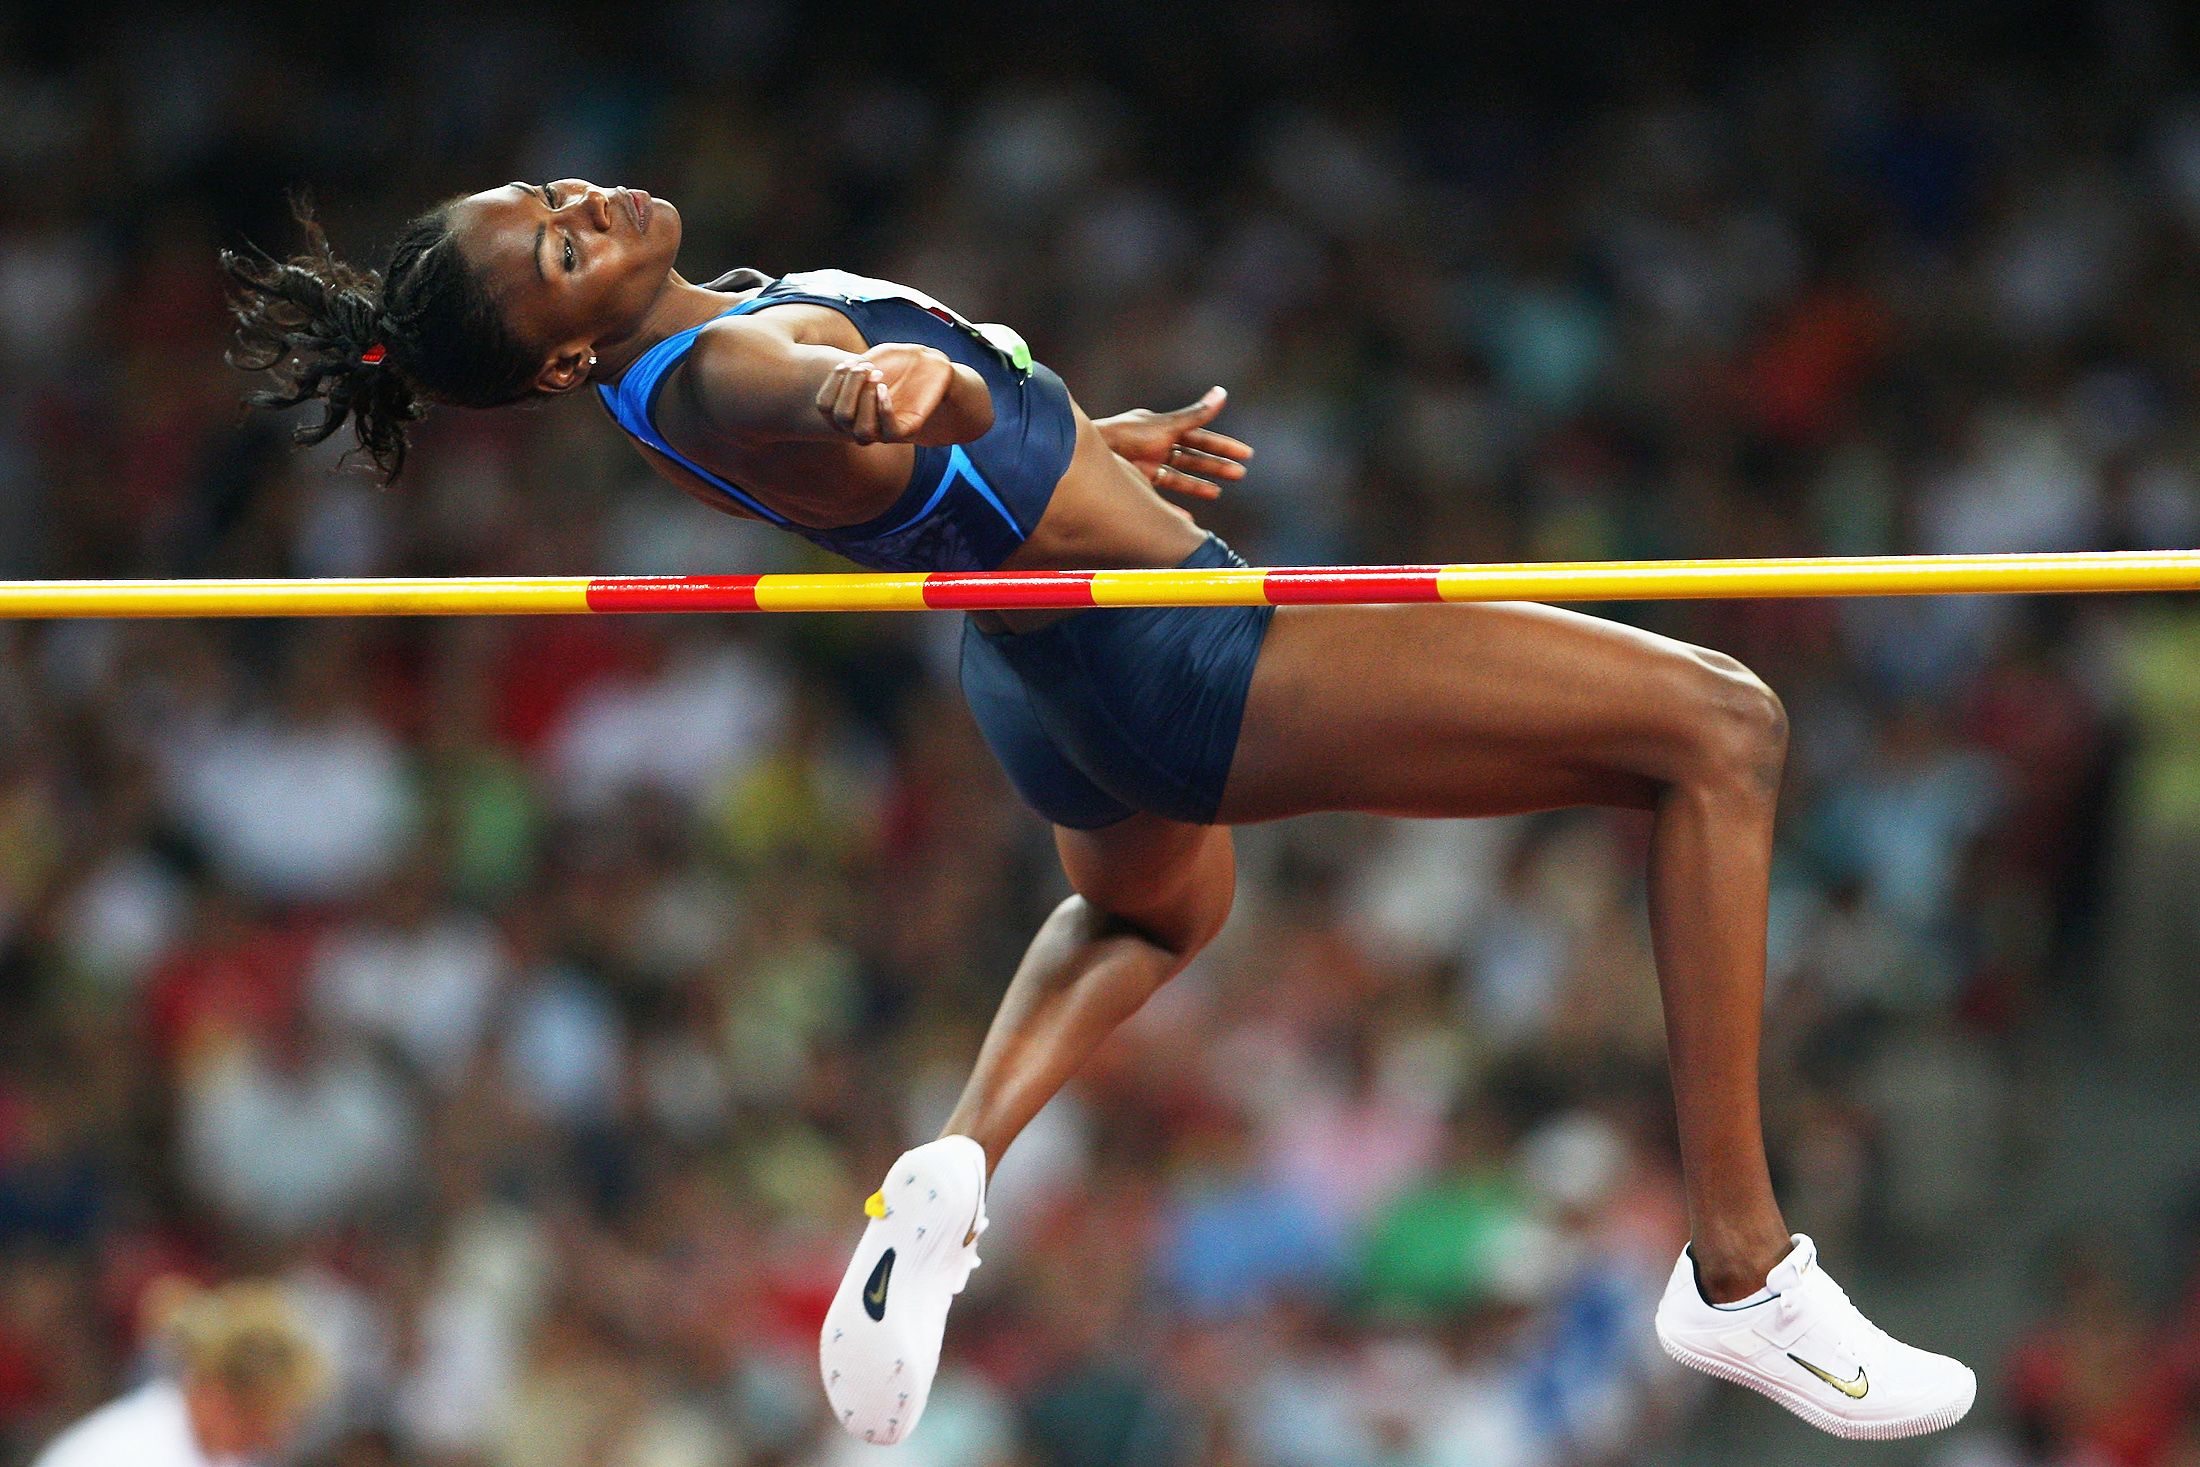 Chaunte Lowe in action at the 2008 Olympic Games in Beijing